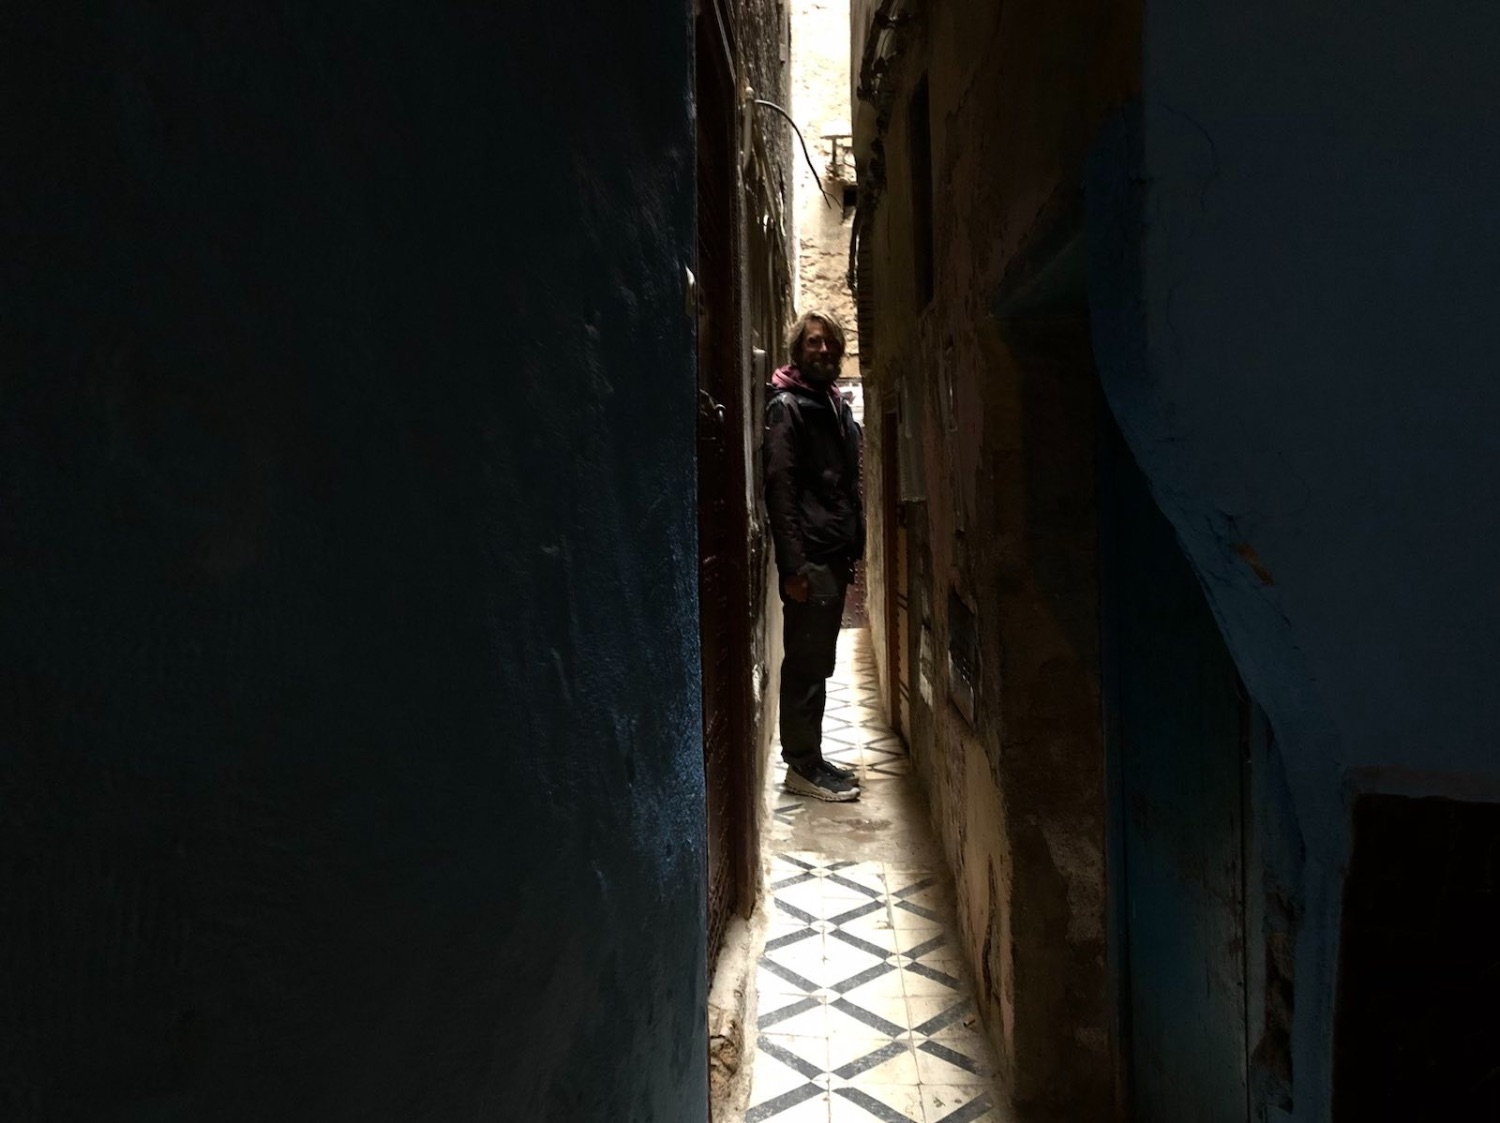 Small streets in the Fès medina